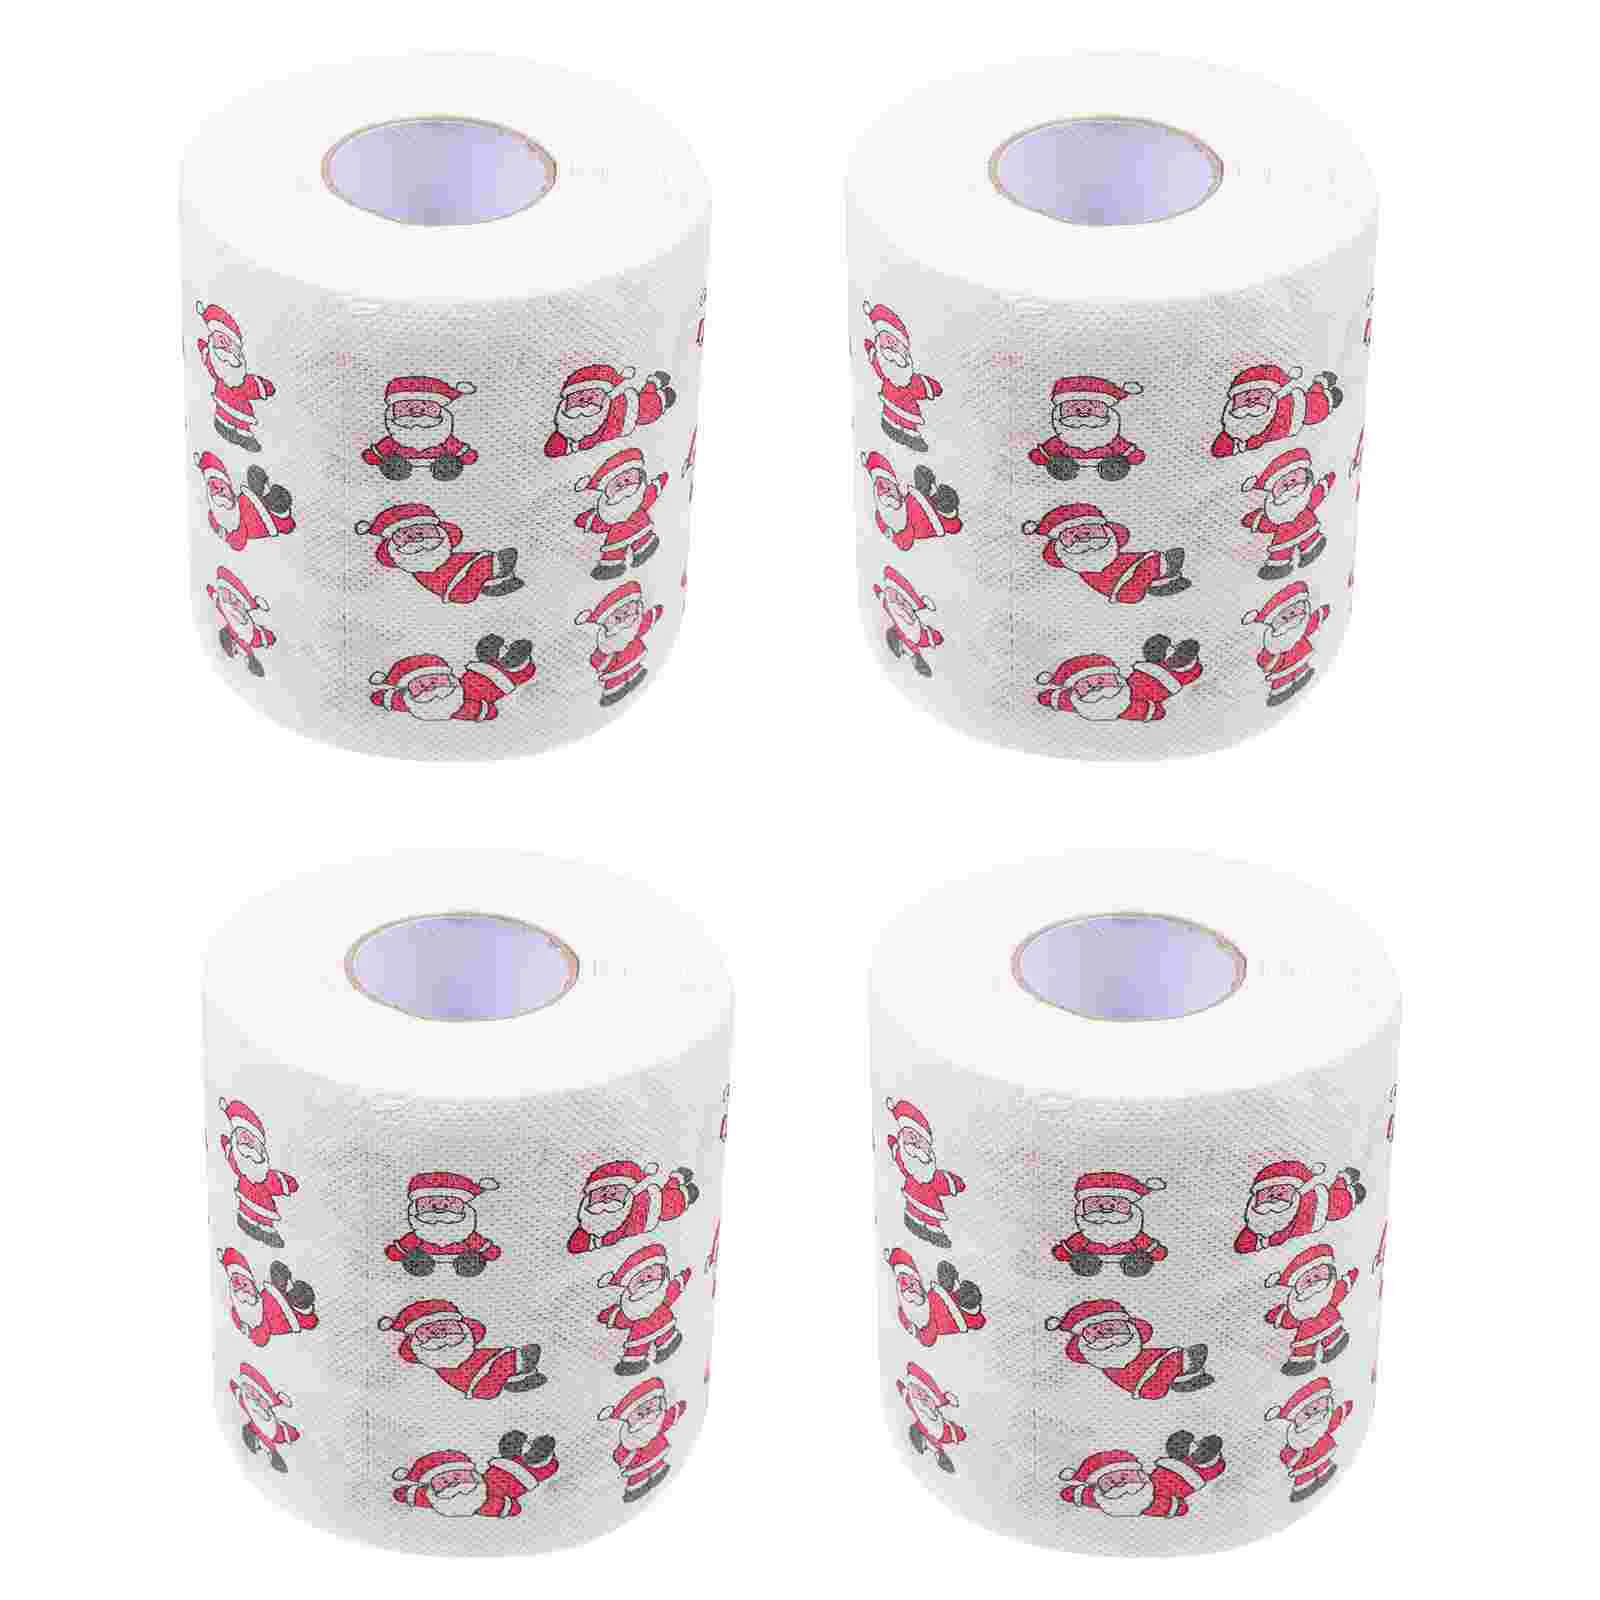 

4 Rolls Christmas Pattern Facial Tissues Napkins Novelty Toilet Papers